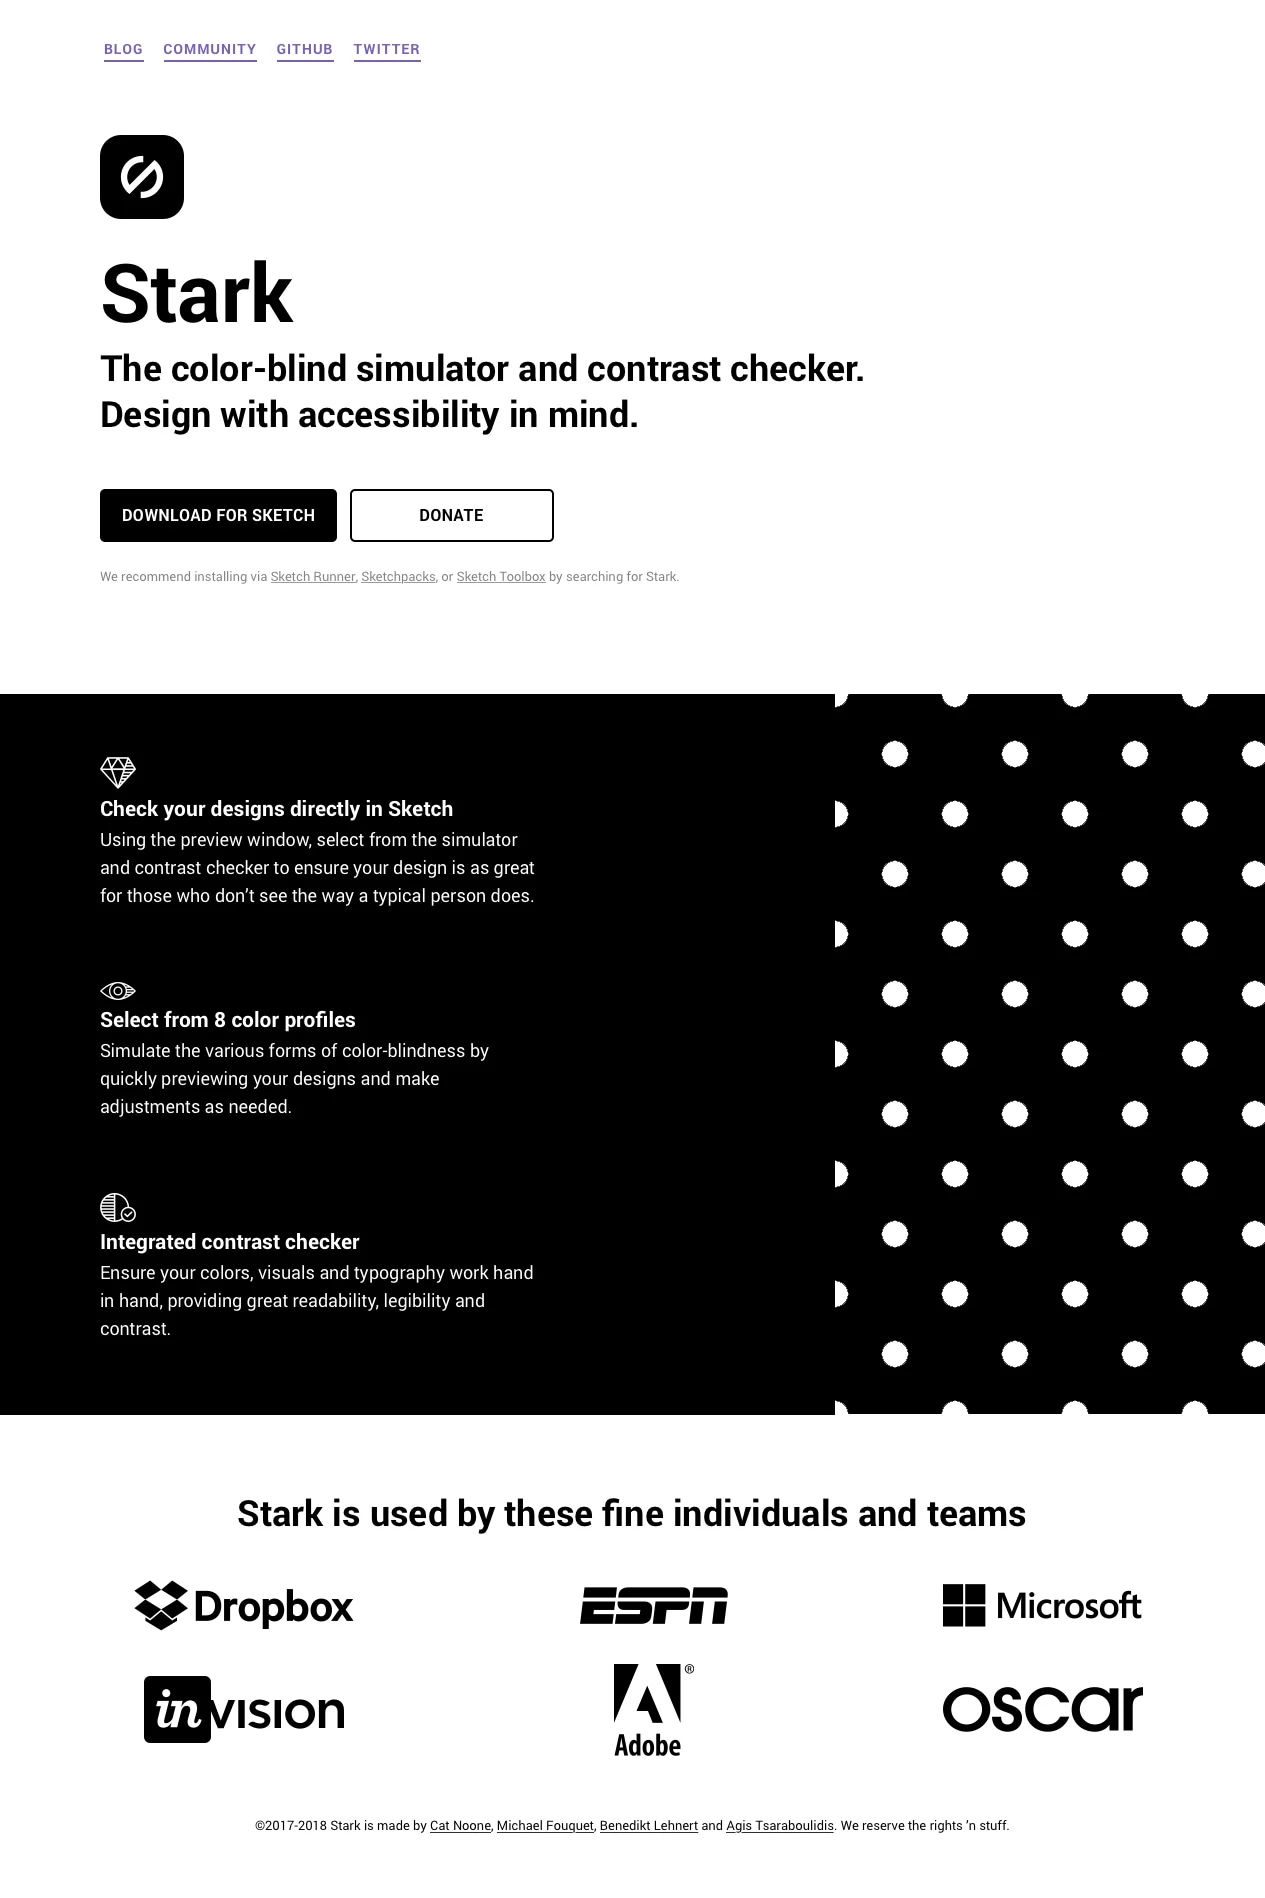 Stark Landing Page Example: The color-blind simulator and contrast checker. Design with accessibility in mind.